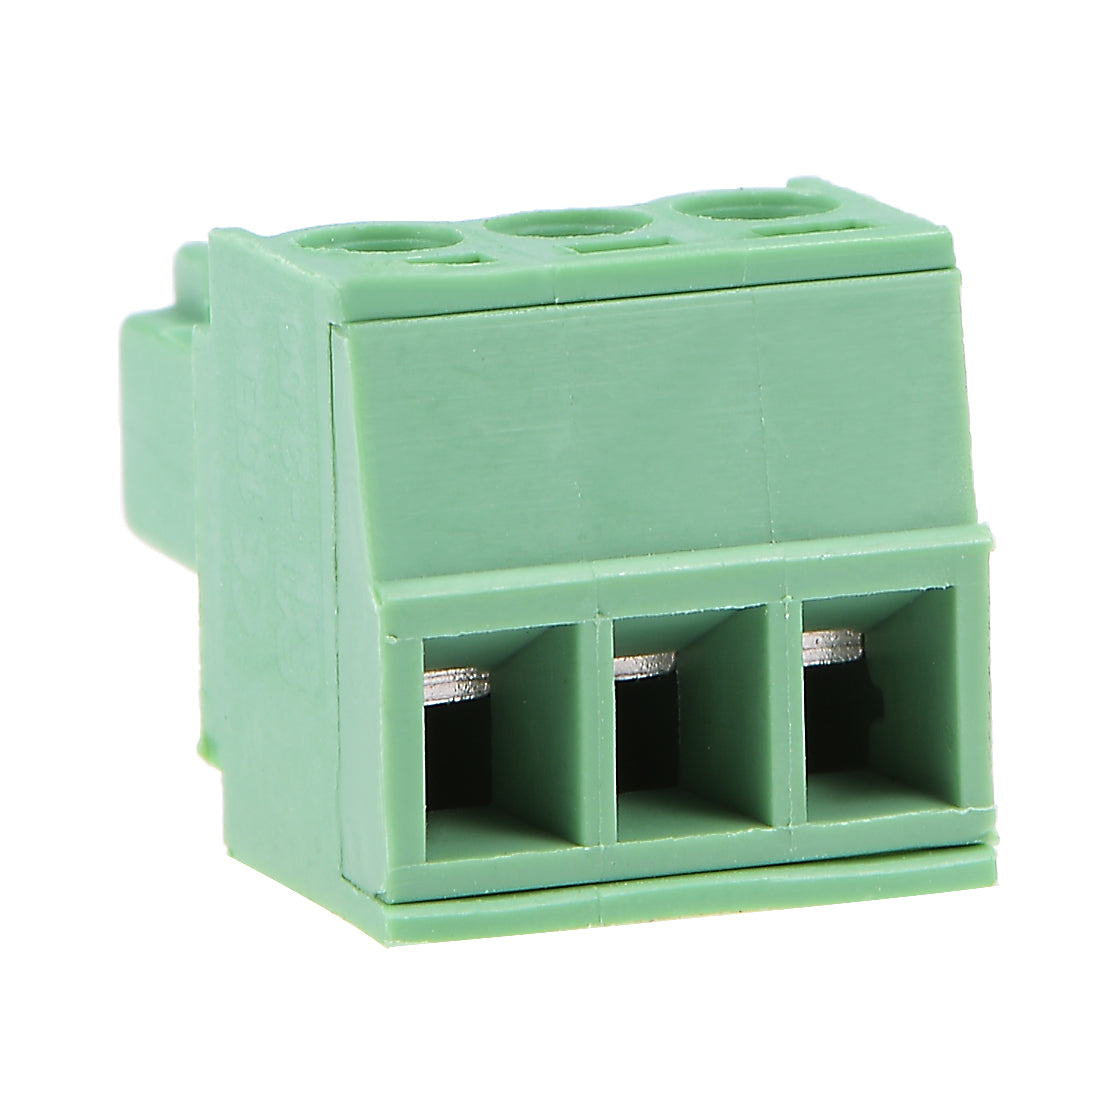 Uxcell Uxcell 15Pcs AC300V 8A 3.5mm Pitch 3P Flat Angle Needle Seat Insert-In PCB Terminal Block Connector green